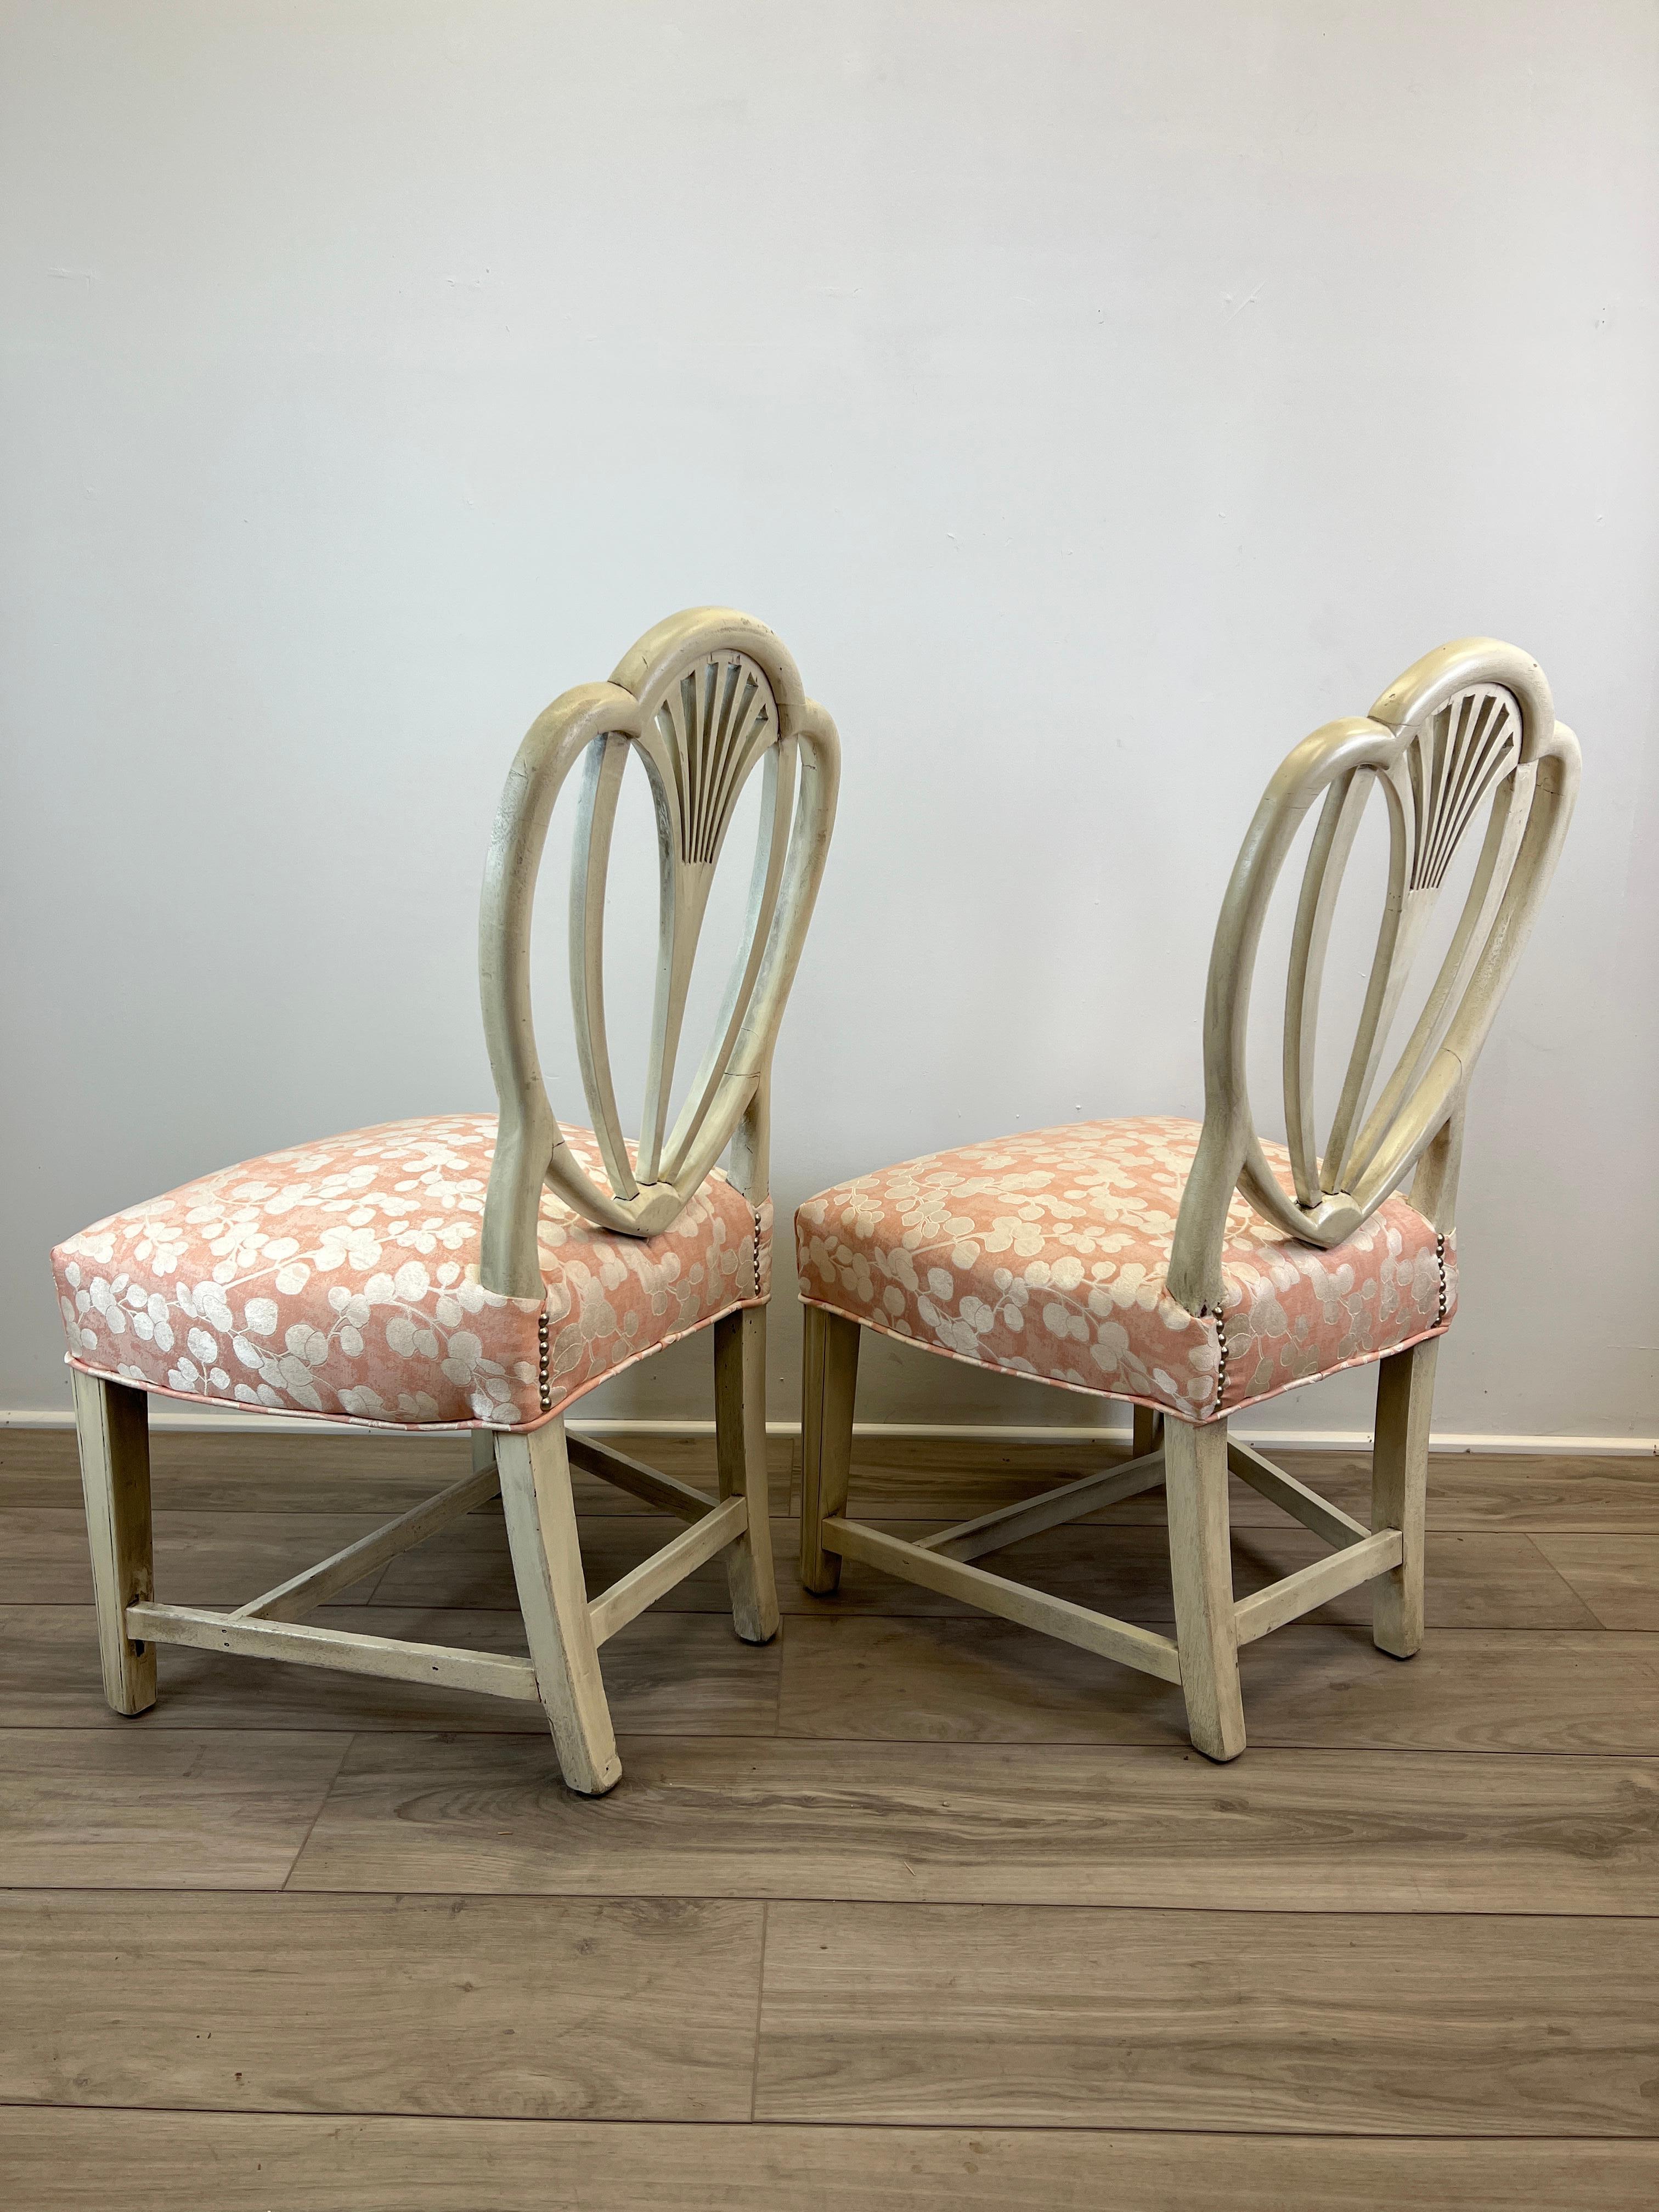 Pair of 18th Century American Mid-Atlantic Hepplewhite Arched Back Side Chairs For Sale 4